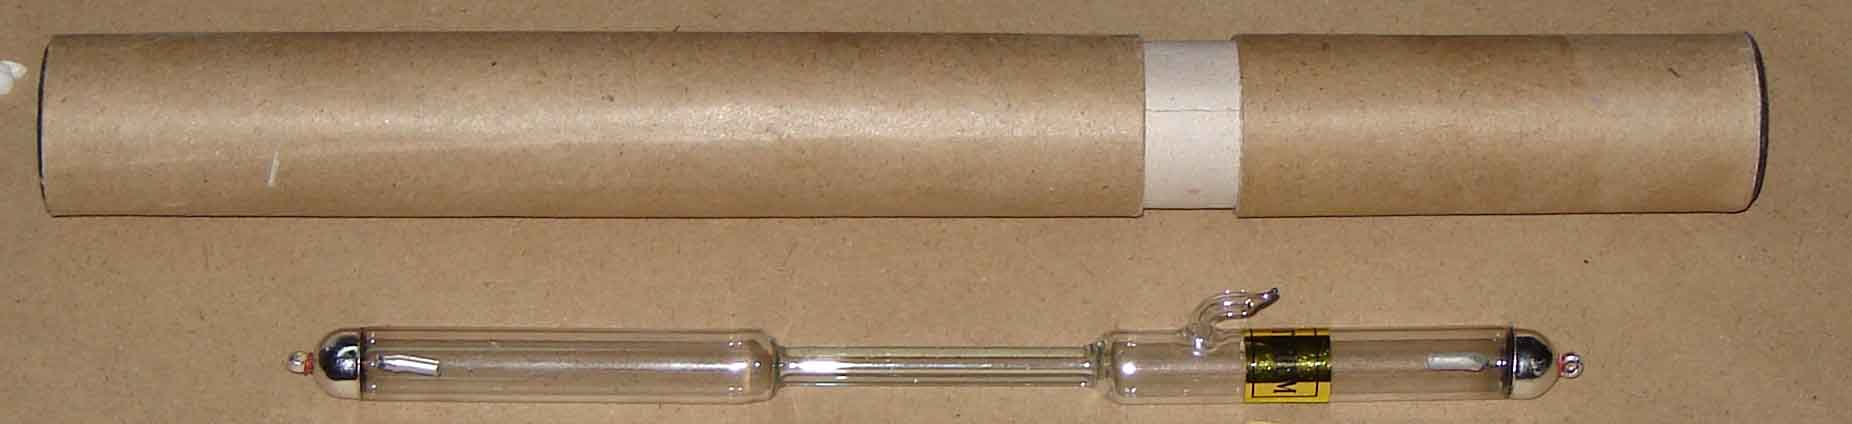 Manufacturers Exporters and Wholesale Suppliers of Spectrum Discharge Tubes with Case Ambala Cantt Haryana